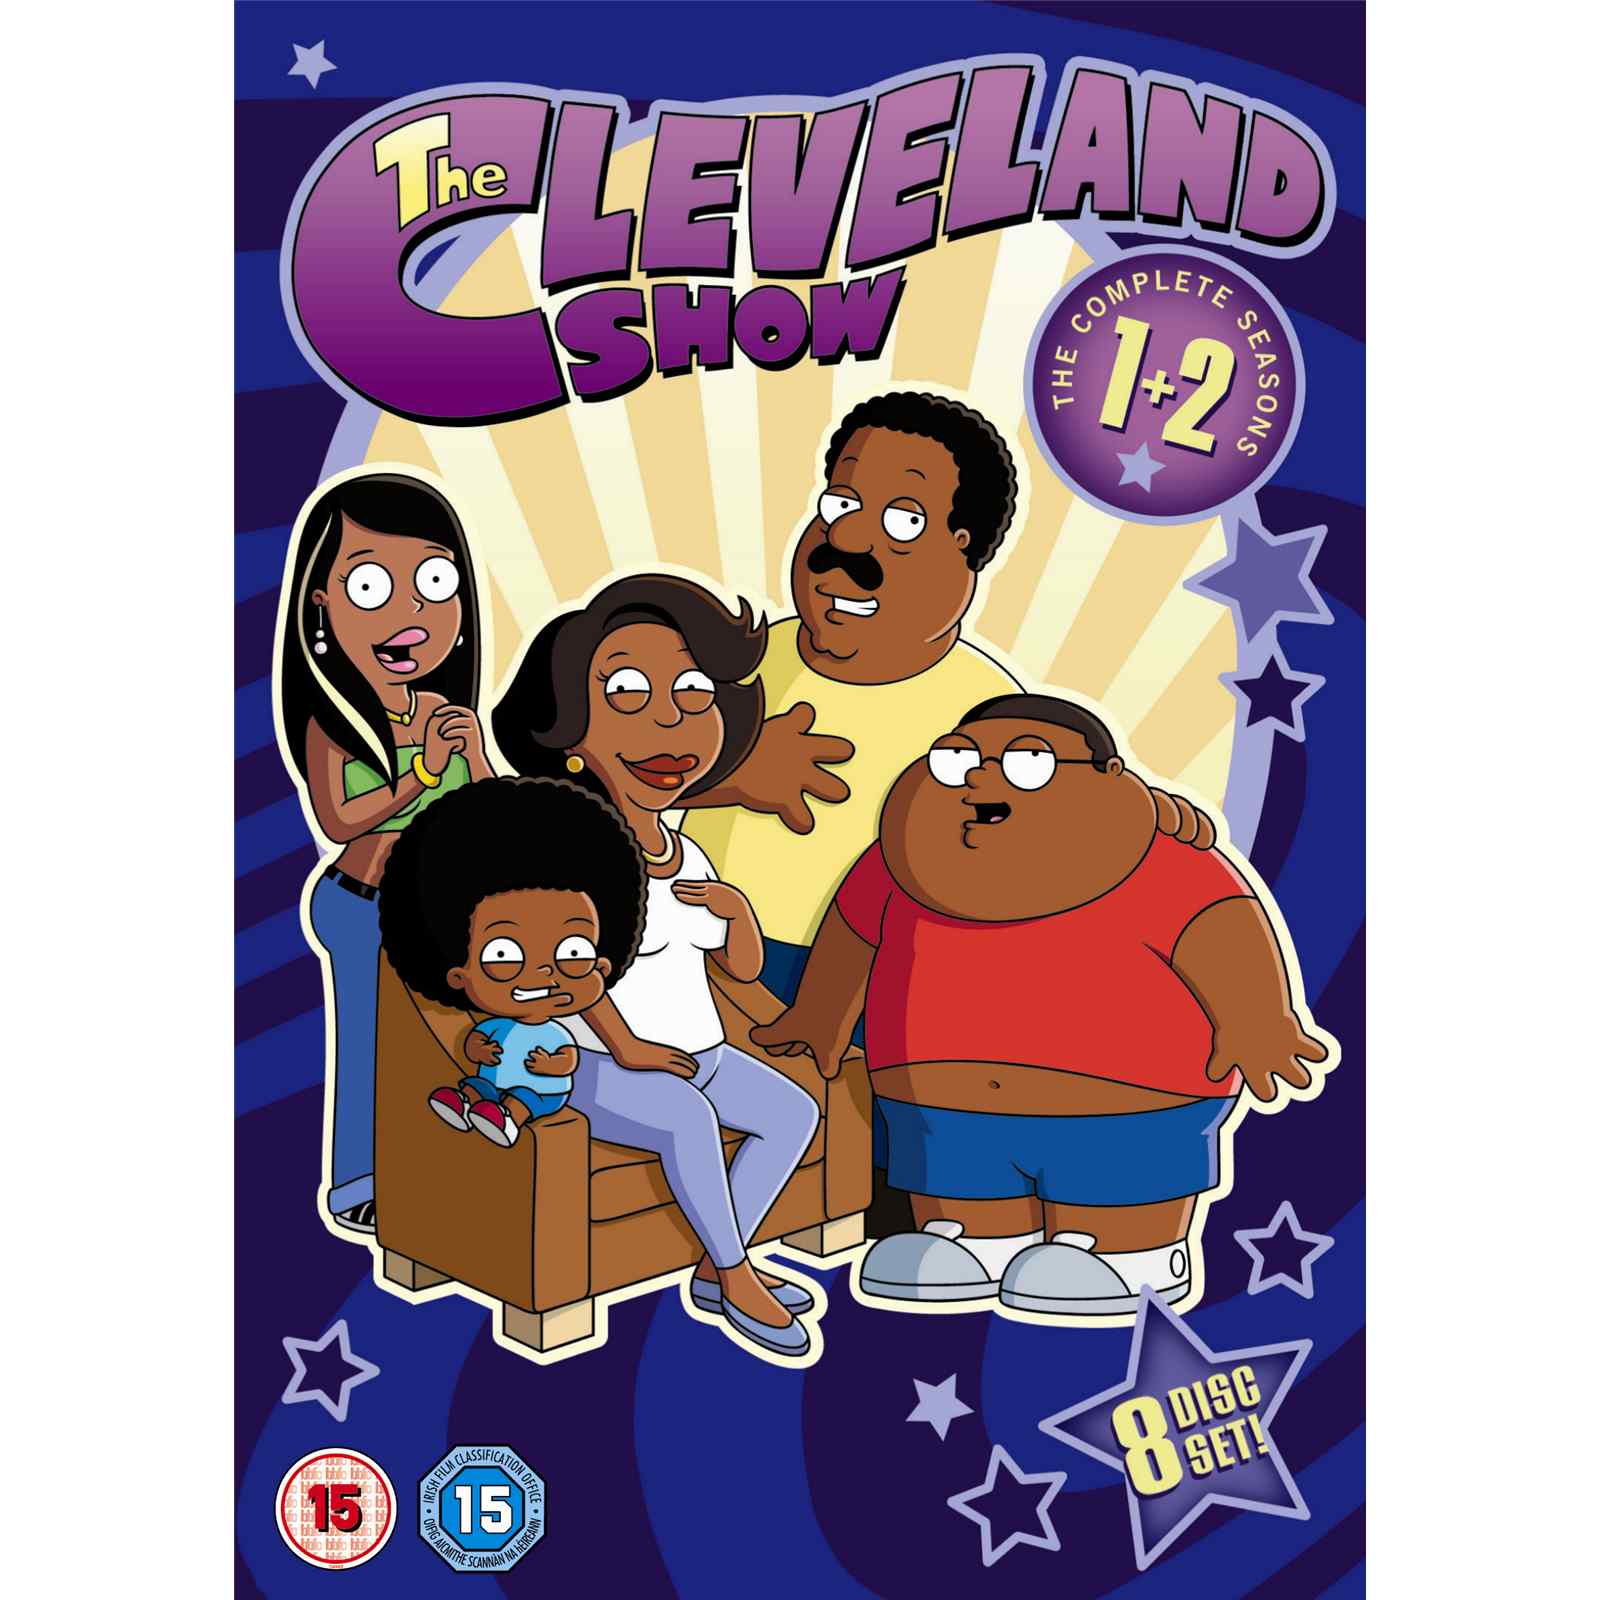 High Resolution Wallpaper | The Cleveland Show 1600x1600 px